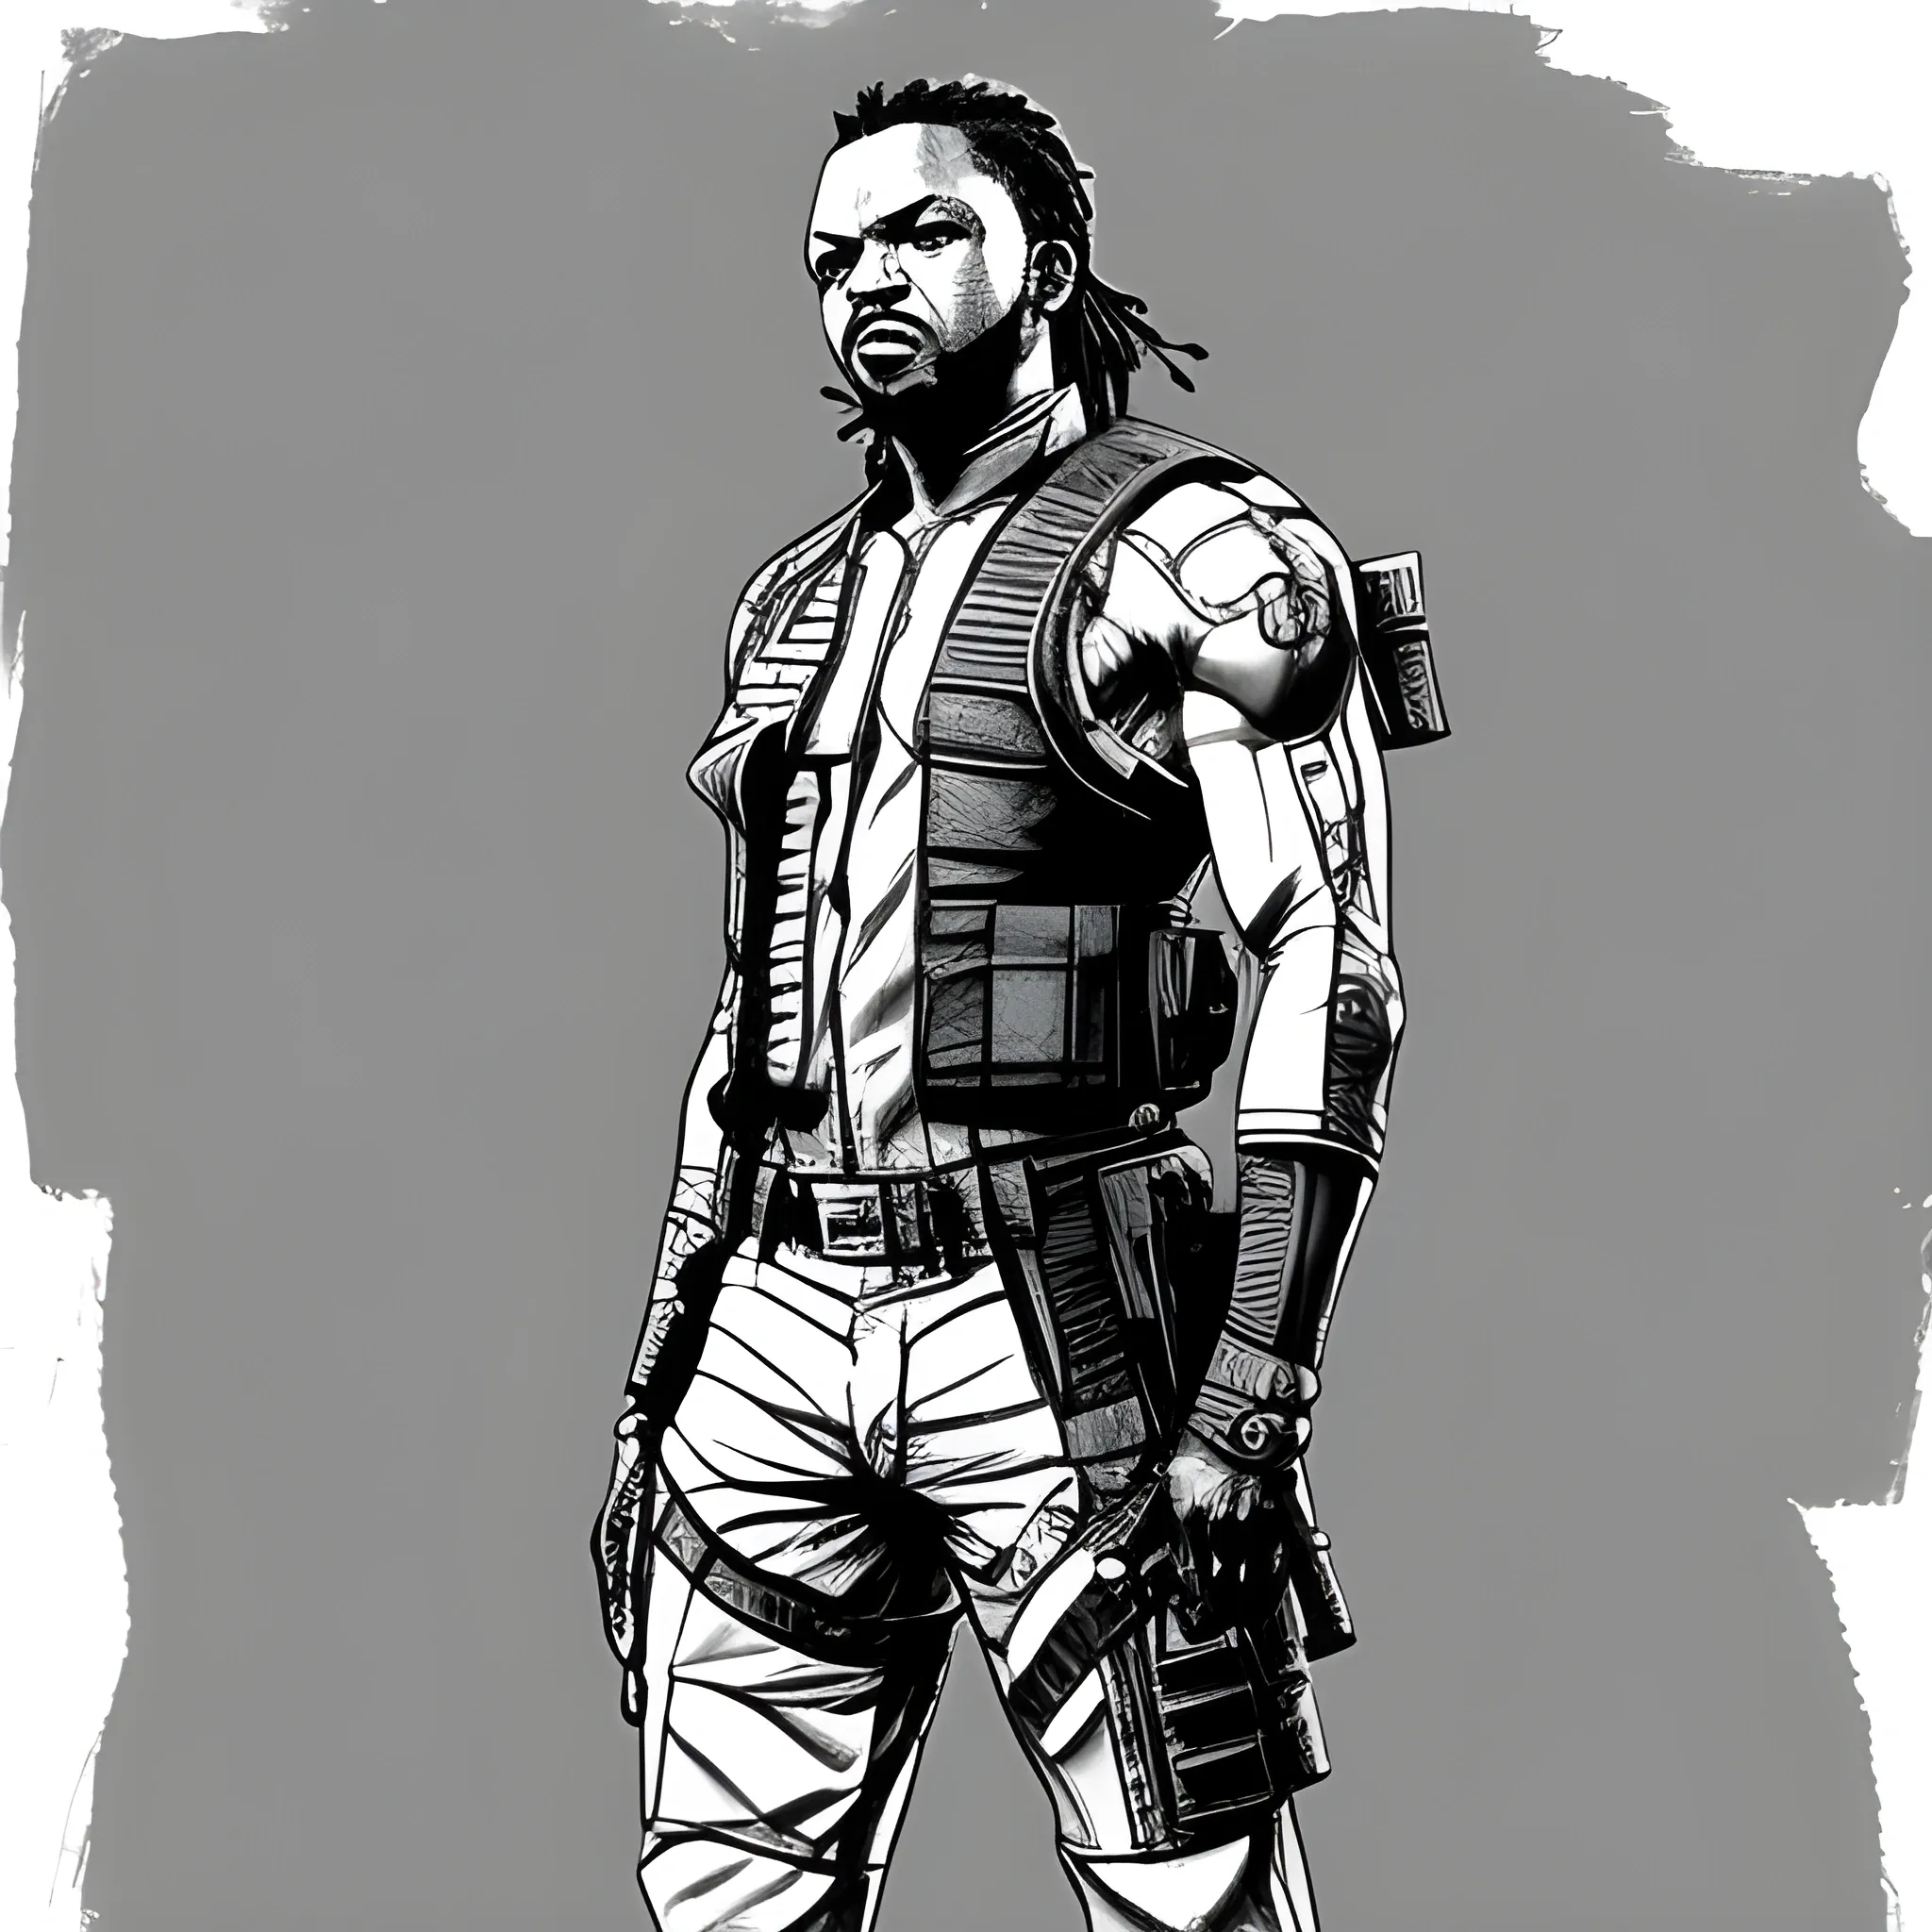 kendrick lamar as a character from the metal gear solid video game saga, full body , Pencil Sketch